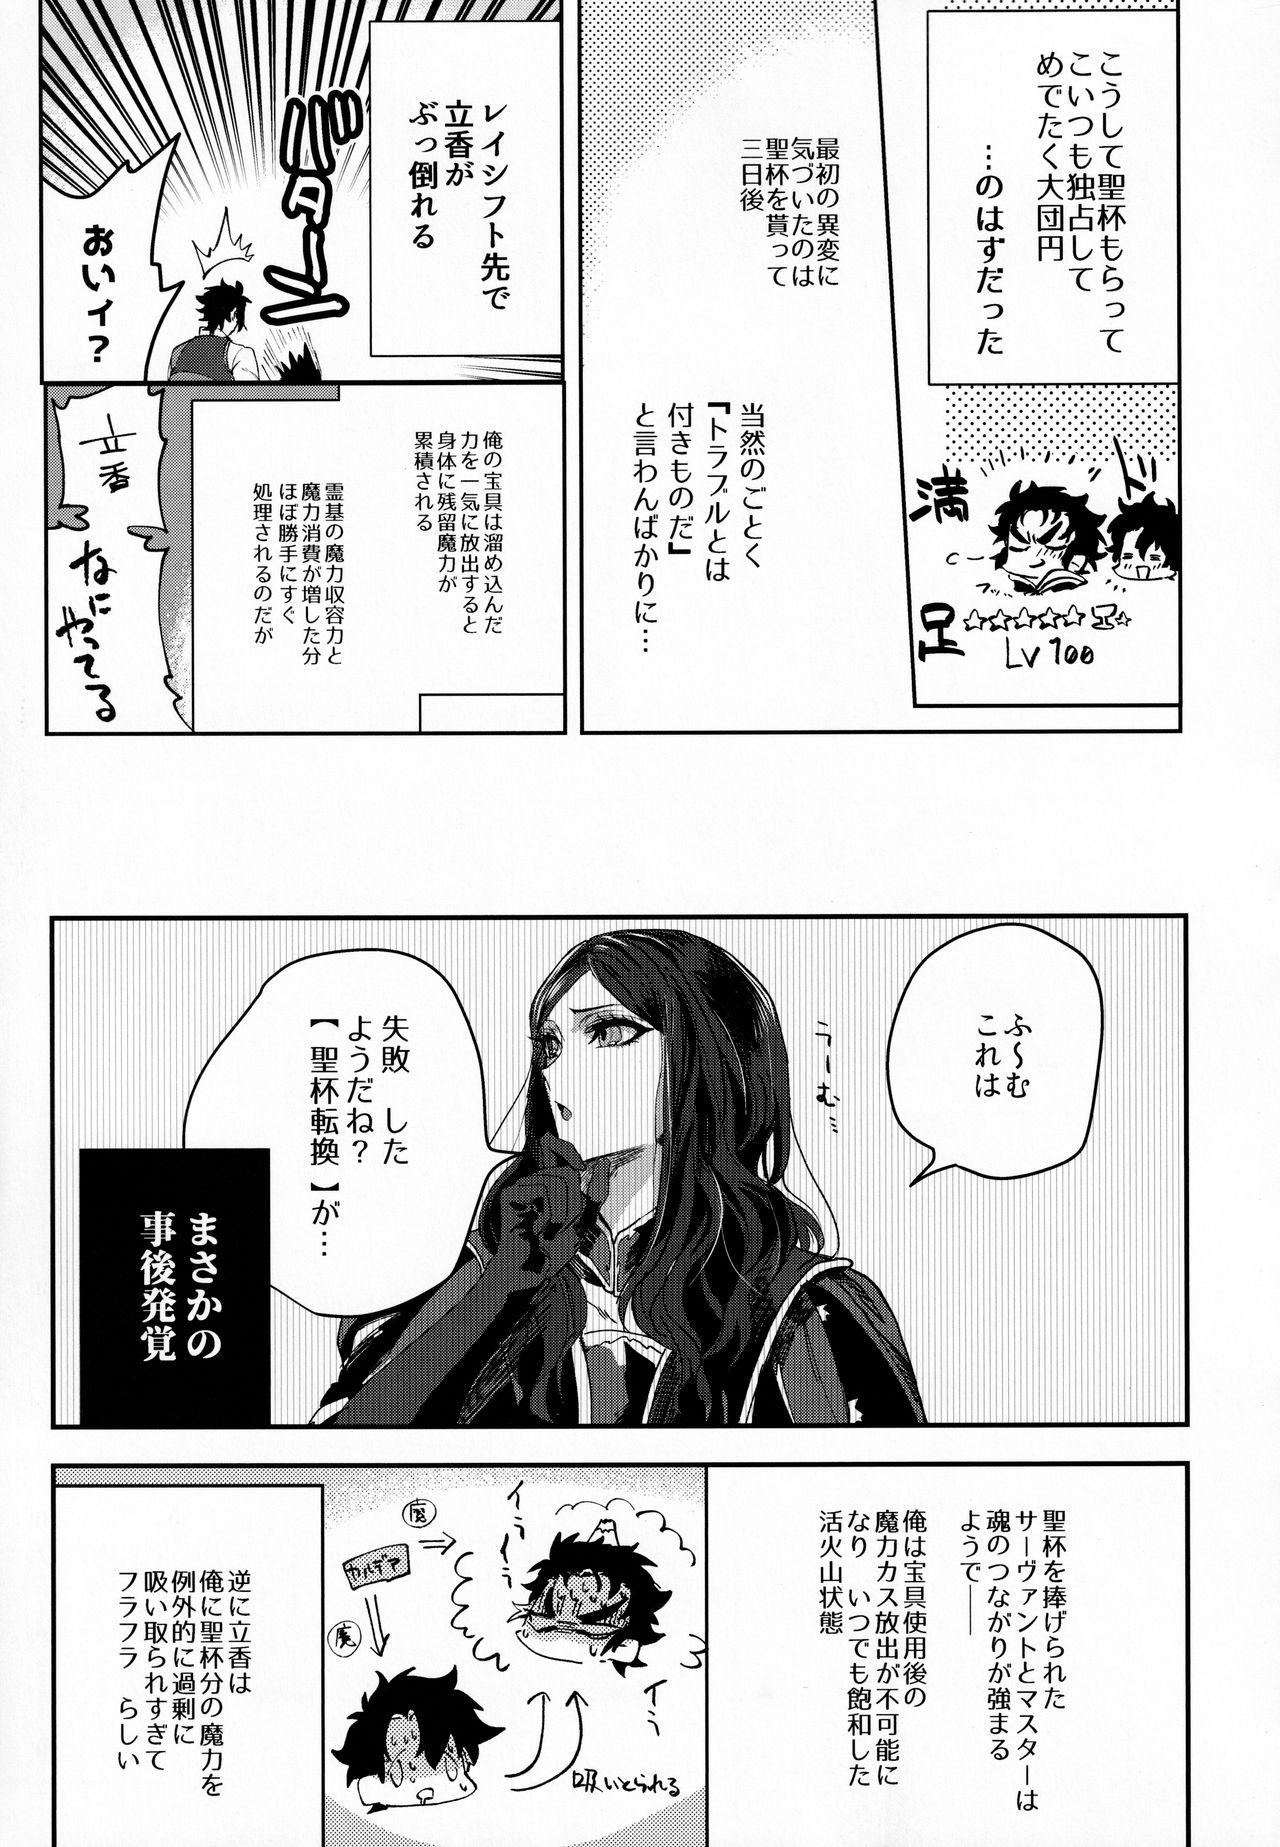 Desperate 耽溺と熱 - Fate grand order 18yearsold - Page 12